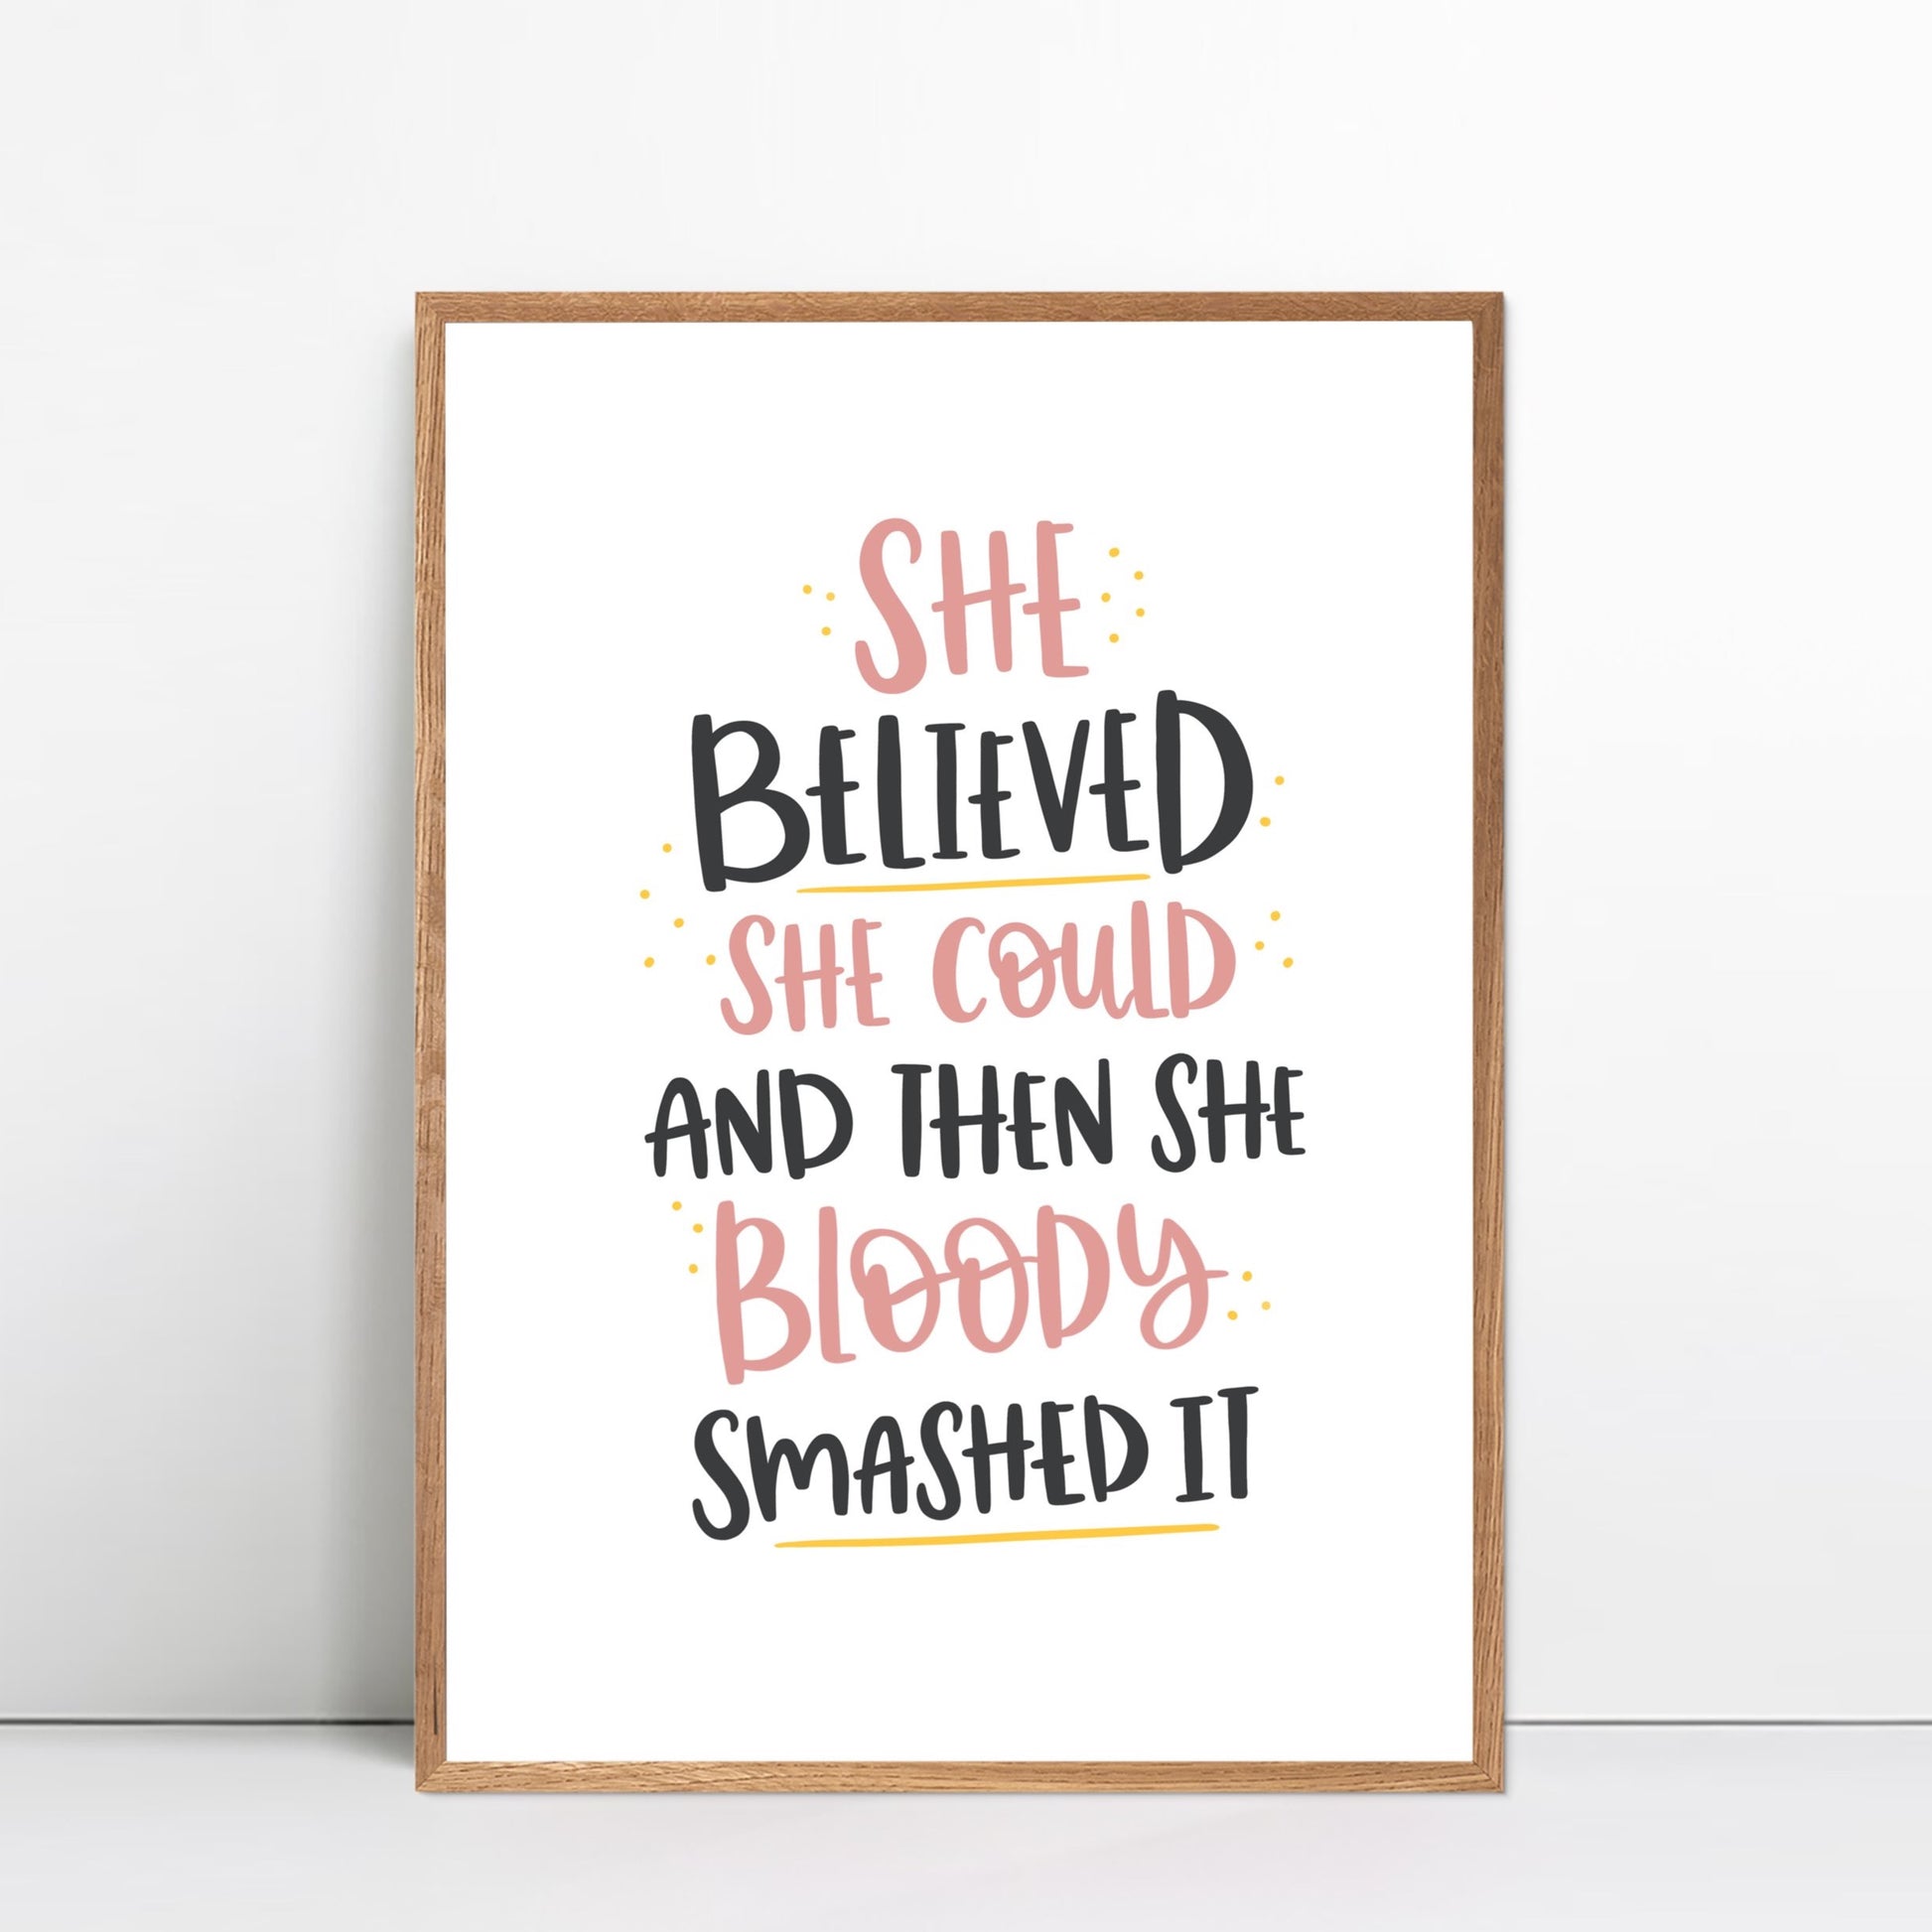 She believed she could and then she bloody smashed it print by Abbie Imagine